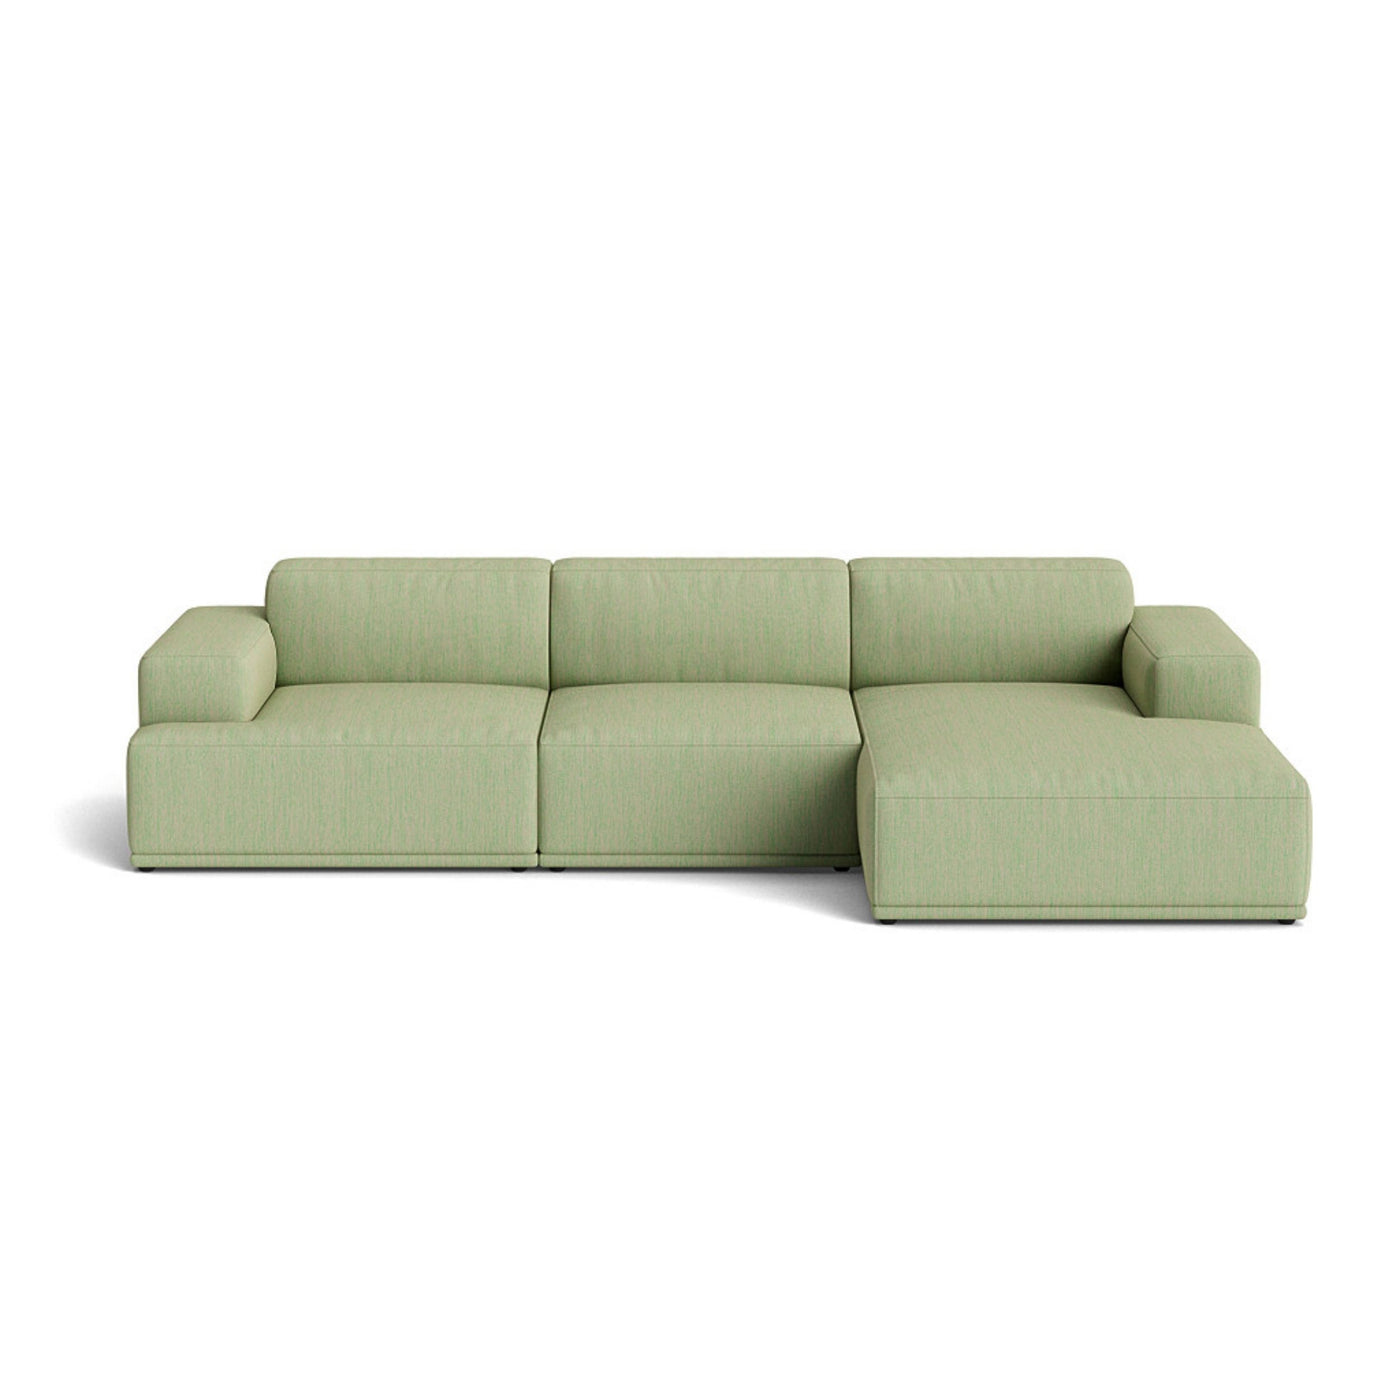 Muuto Connect Soft Modular 3 Seater Sofa, configuration 3. Made-to-order from someday designs. #colour_balder-942